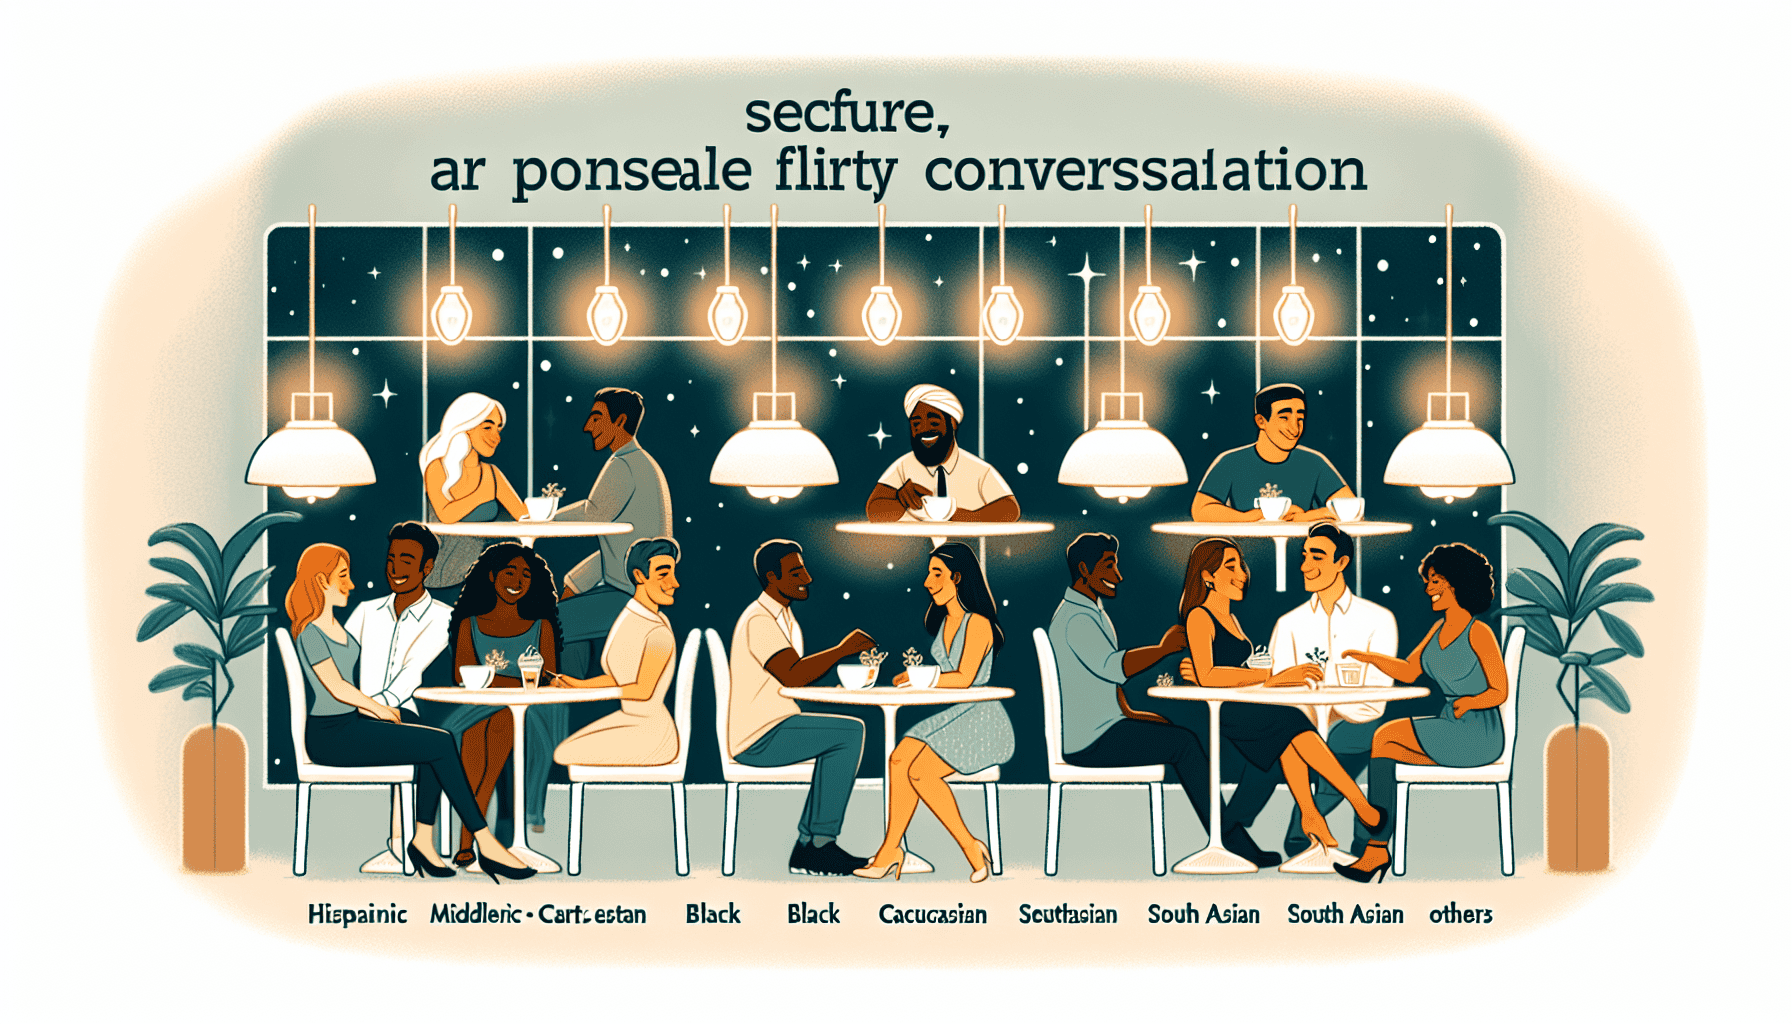 Illustration of paid flirty conversations in a safe online environment